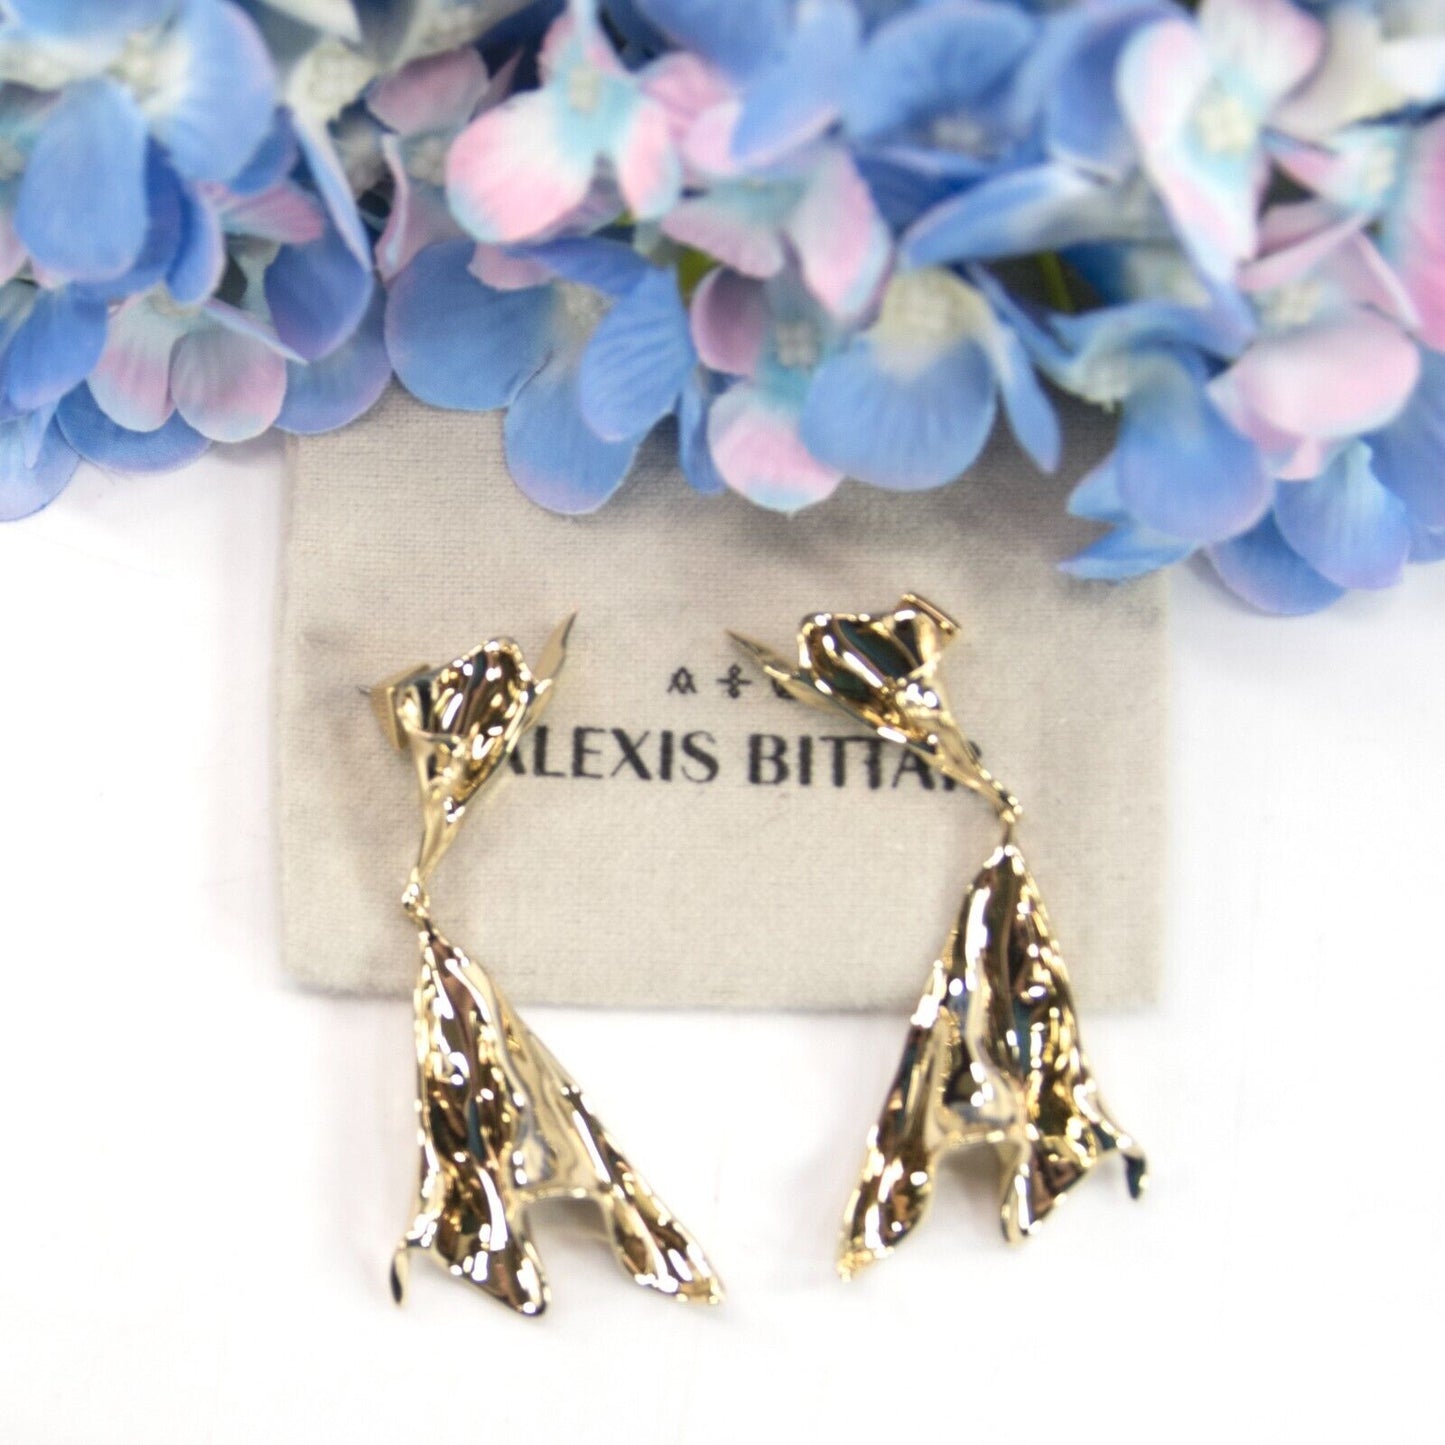 Alexis Bittar Gold Plated Crumpled Metal LARGE Drop Earrings NWT